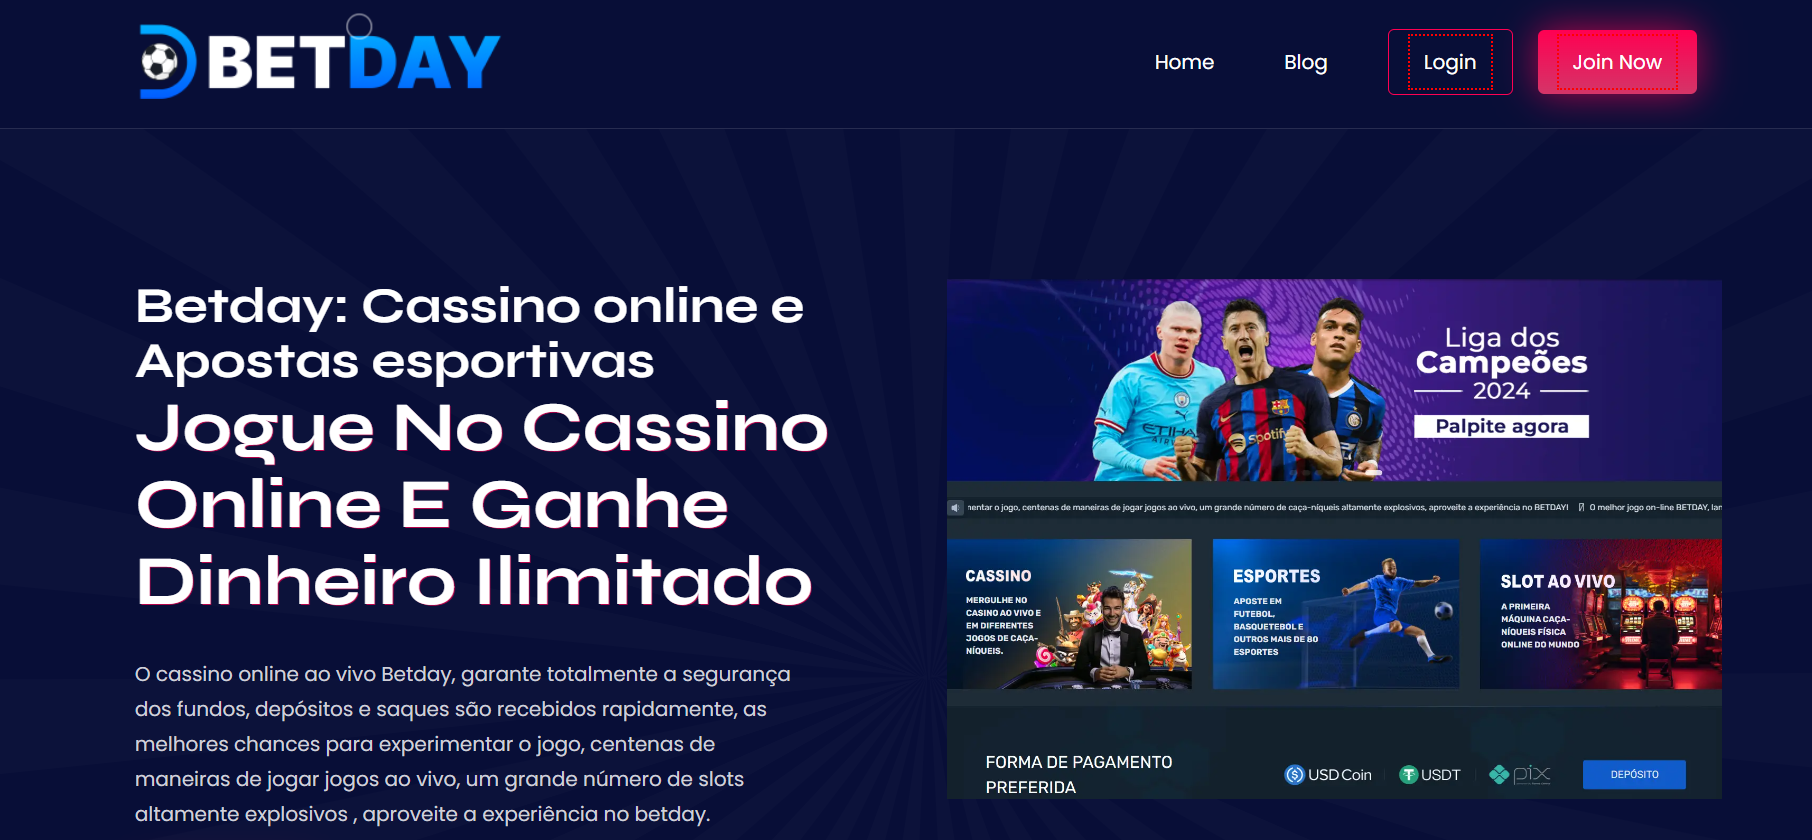 Betday Casino Online: An Overview Of Live Casino Games